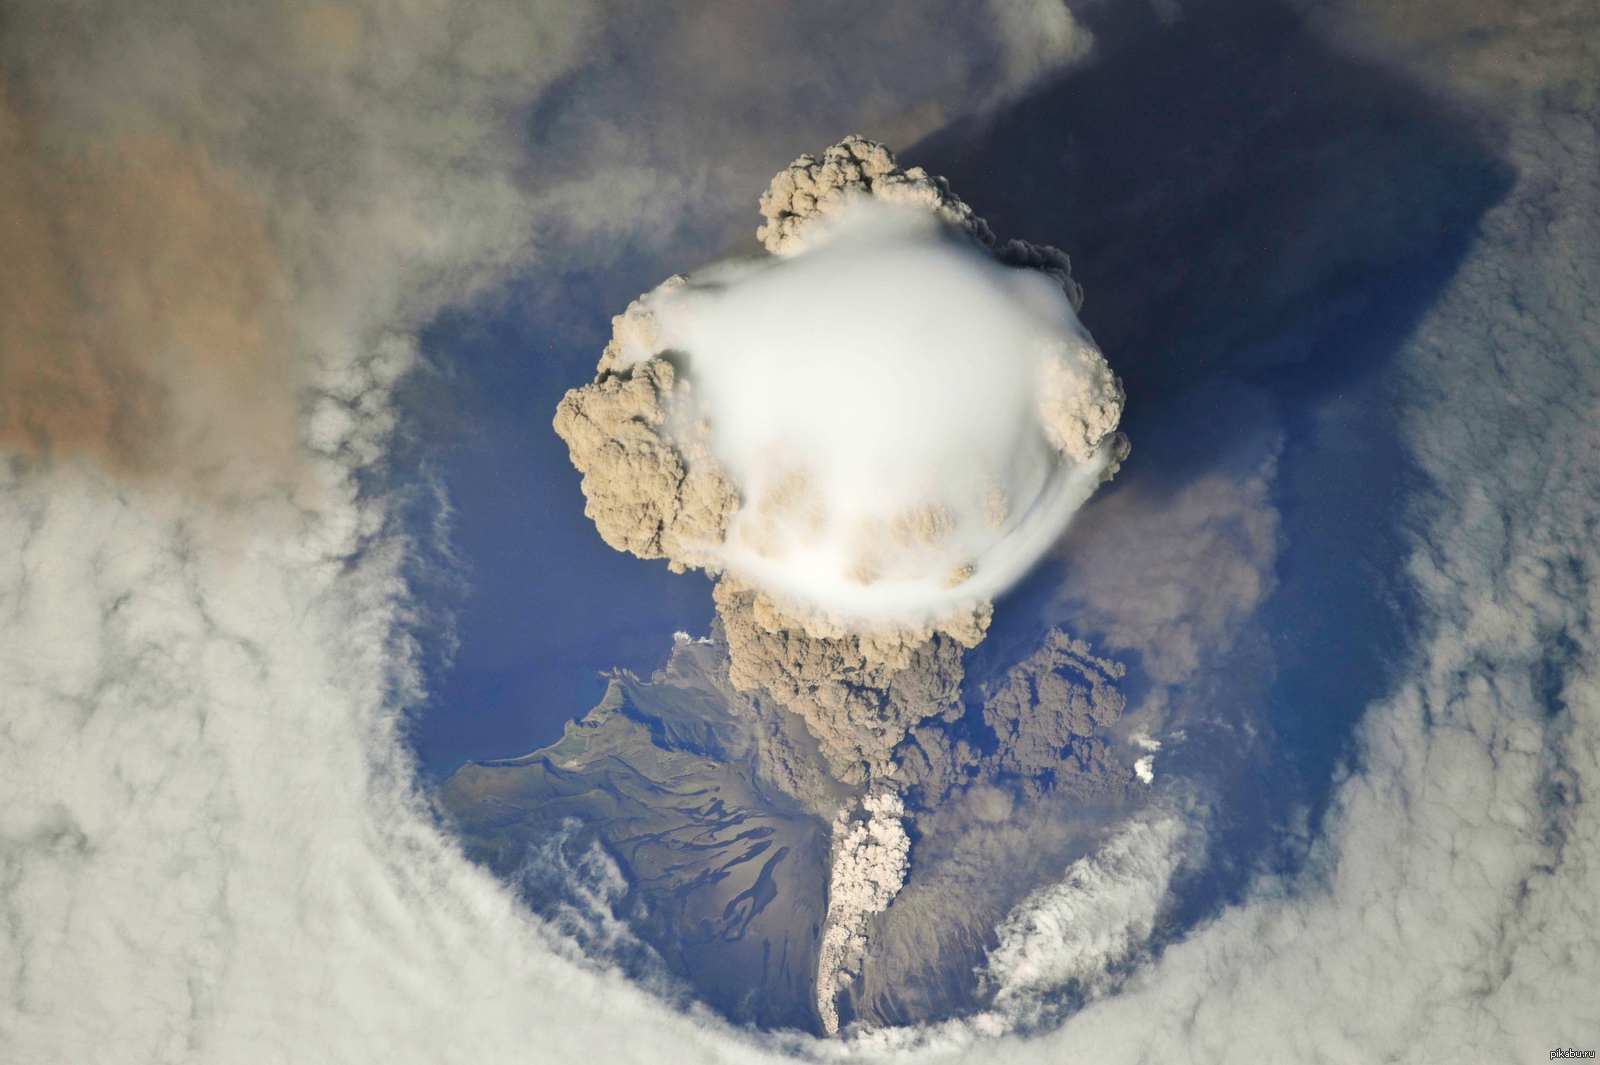 Stunning view of the volcanic eruption on the island of Matua in the Kuril chain, taken by an astronaut from the space station on June 12, 2009 - Space, Kurile Islands, Volcano, Sarychev volcano, Eruption